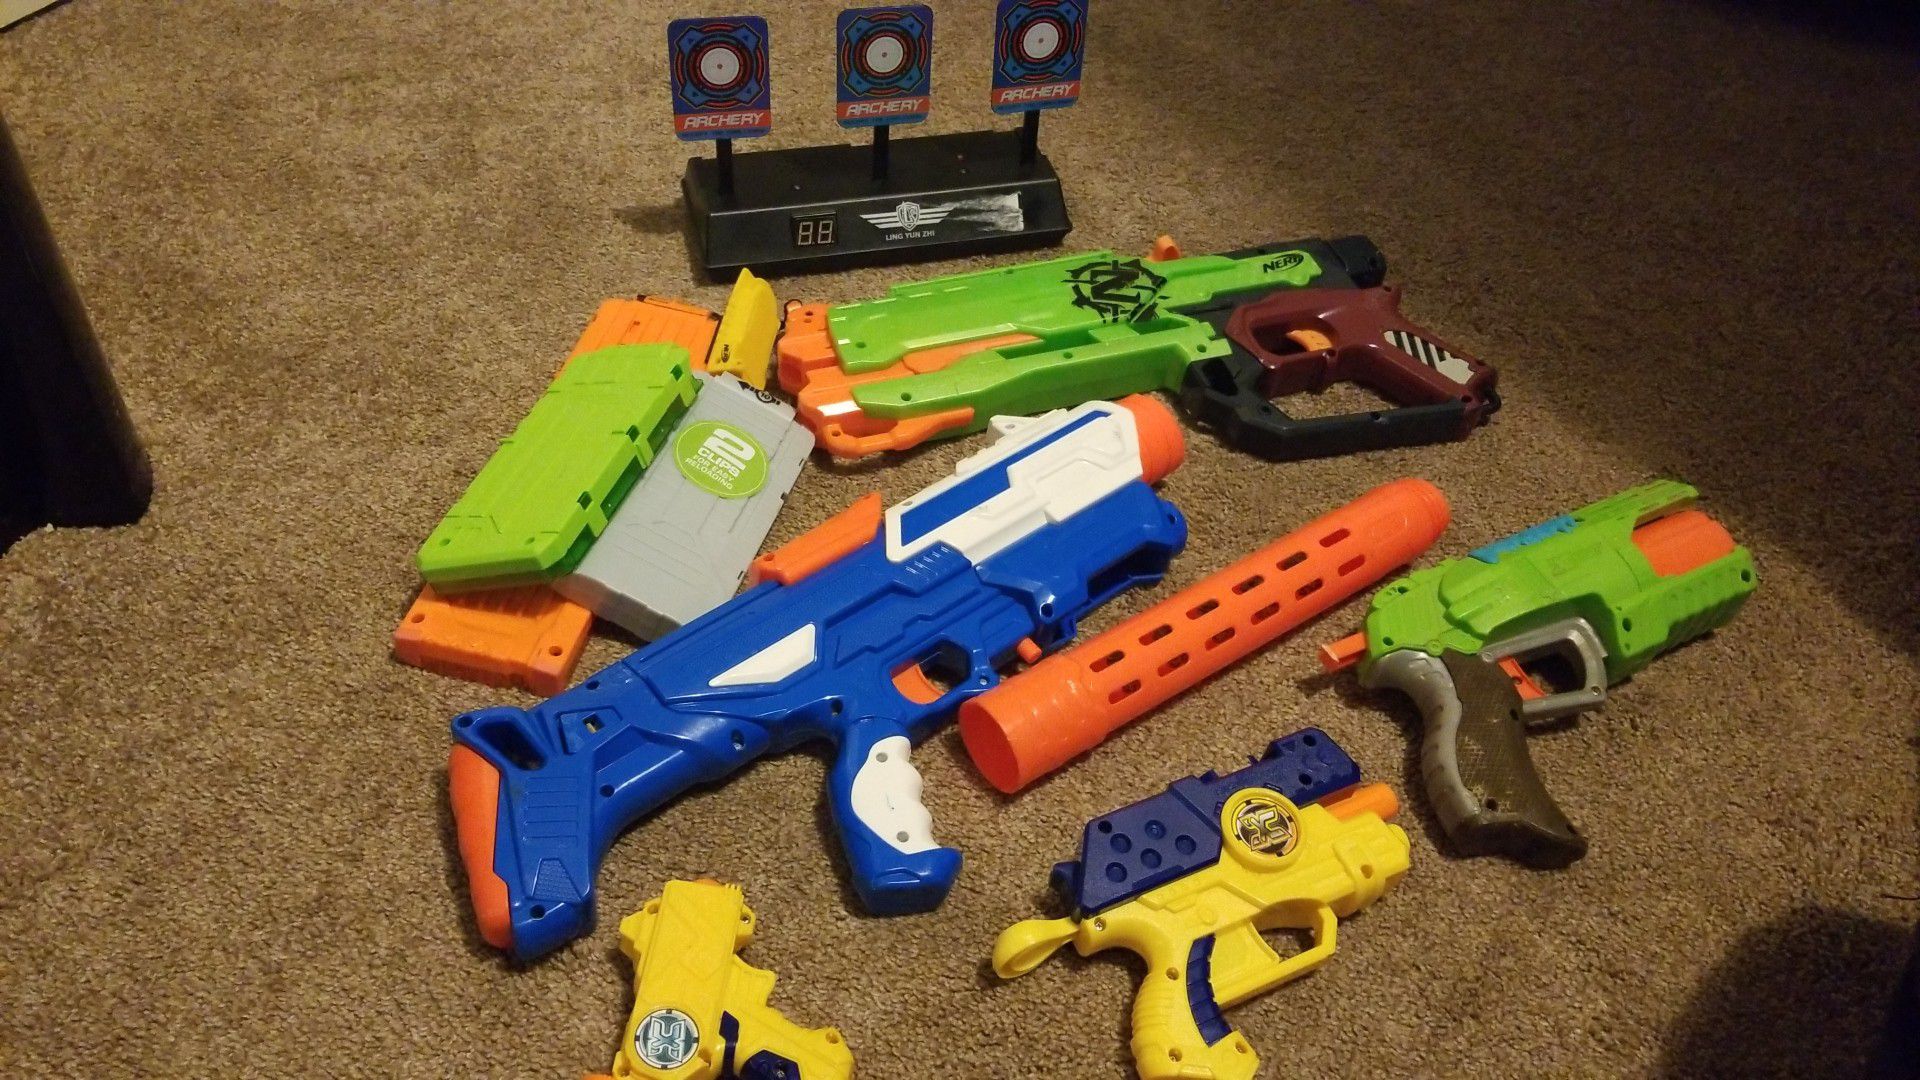 Nerf guns and accessories...